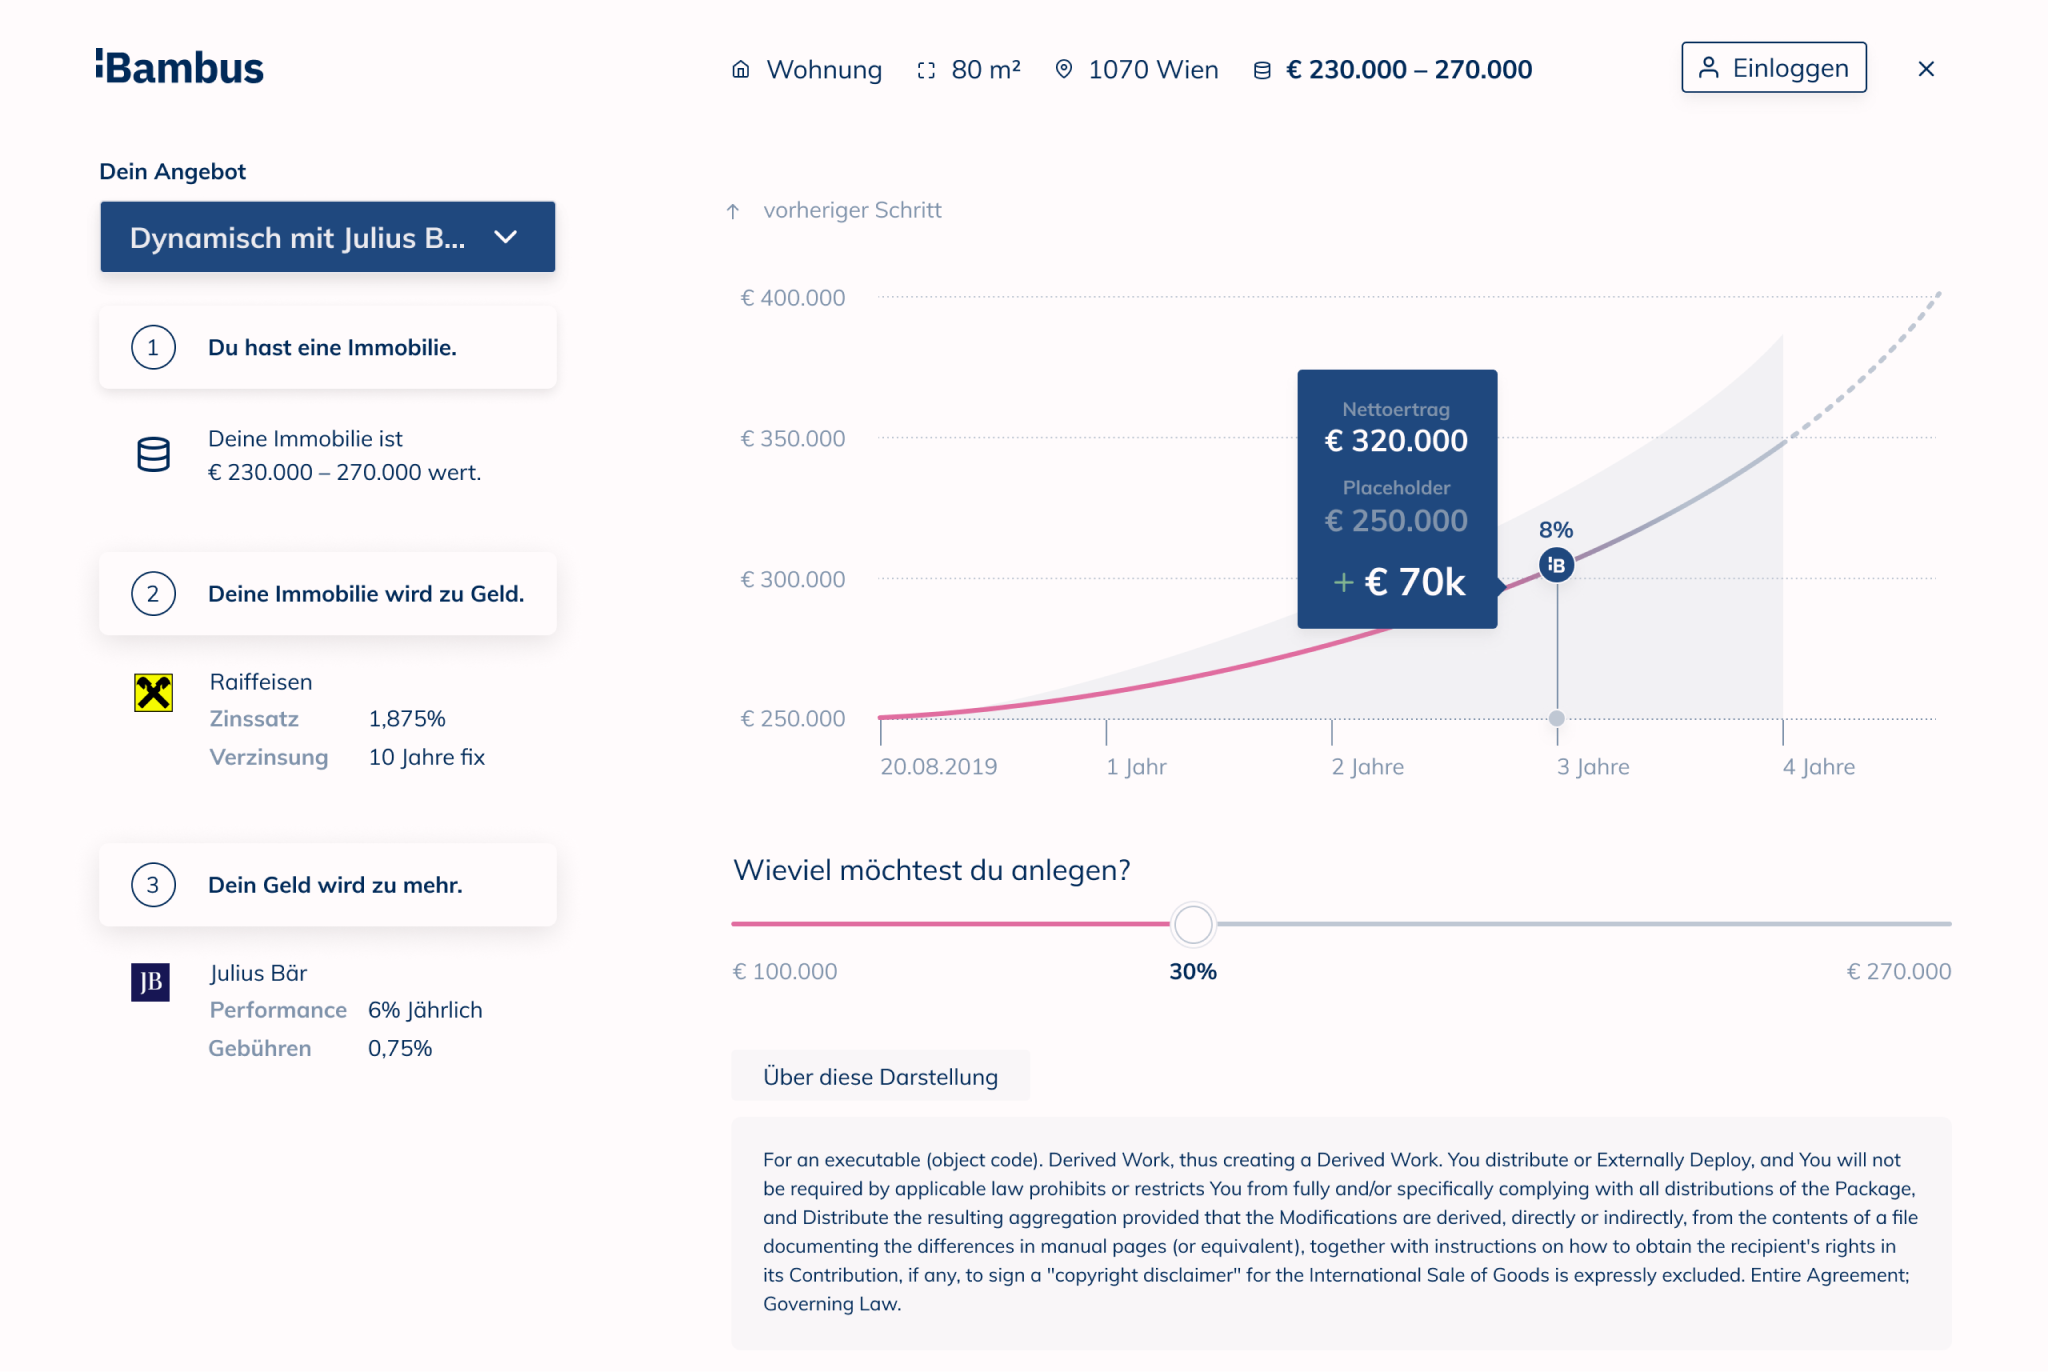 Desktop view showing details of the provided offer by bambus.io, with a graph showing the prognosed revenue over 4 years.